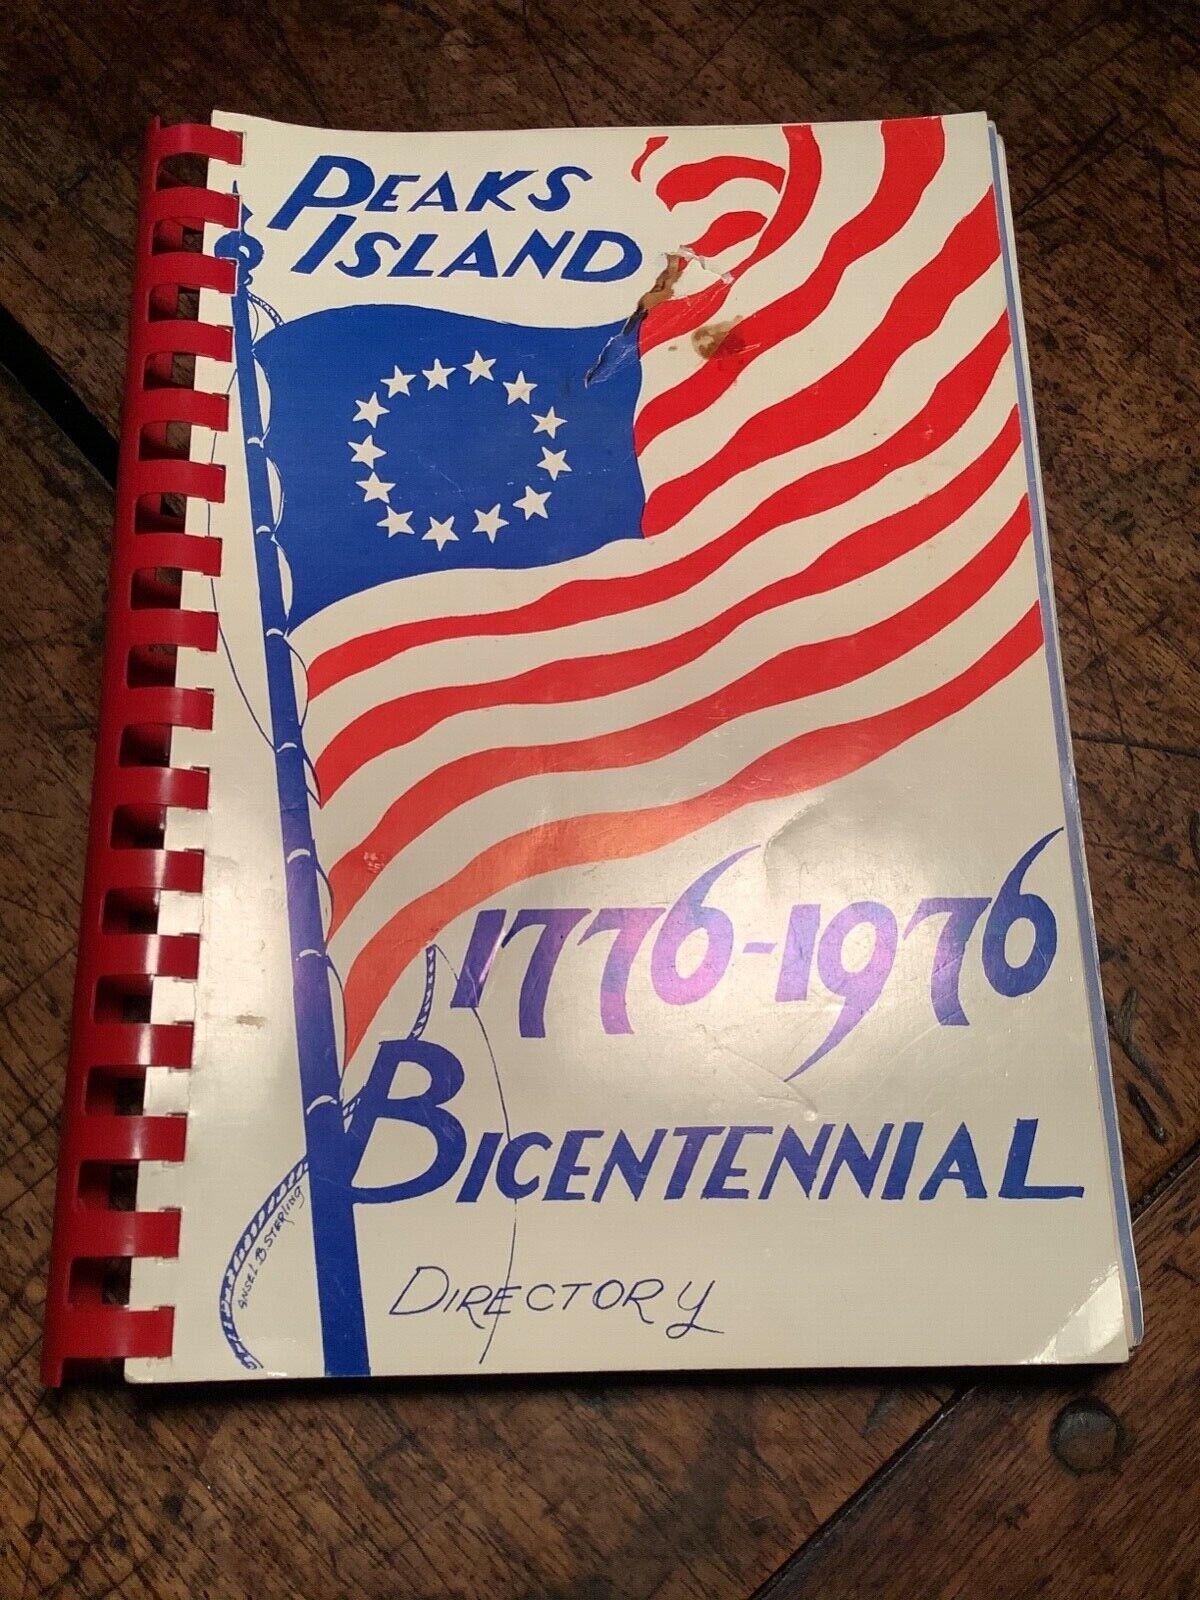 Peaks Island Maine 1776-1976 Bicentennial directory, history, businesses, scouts